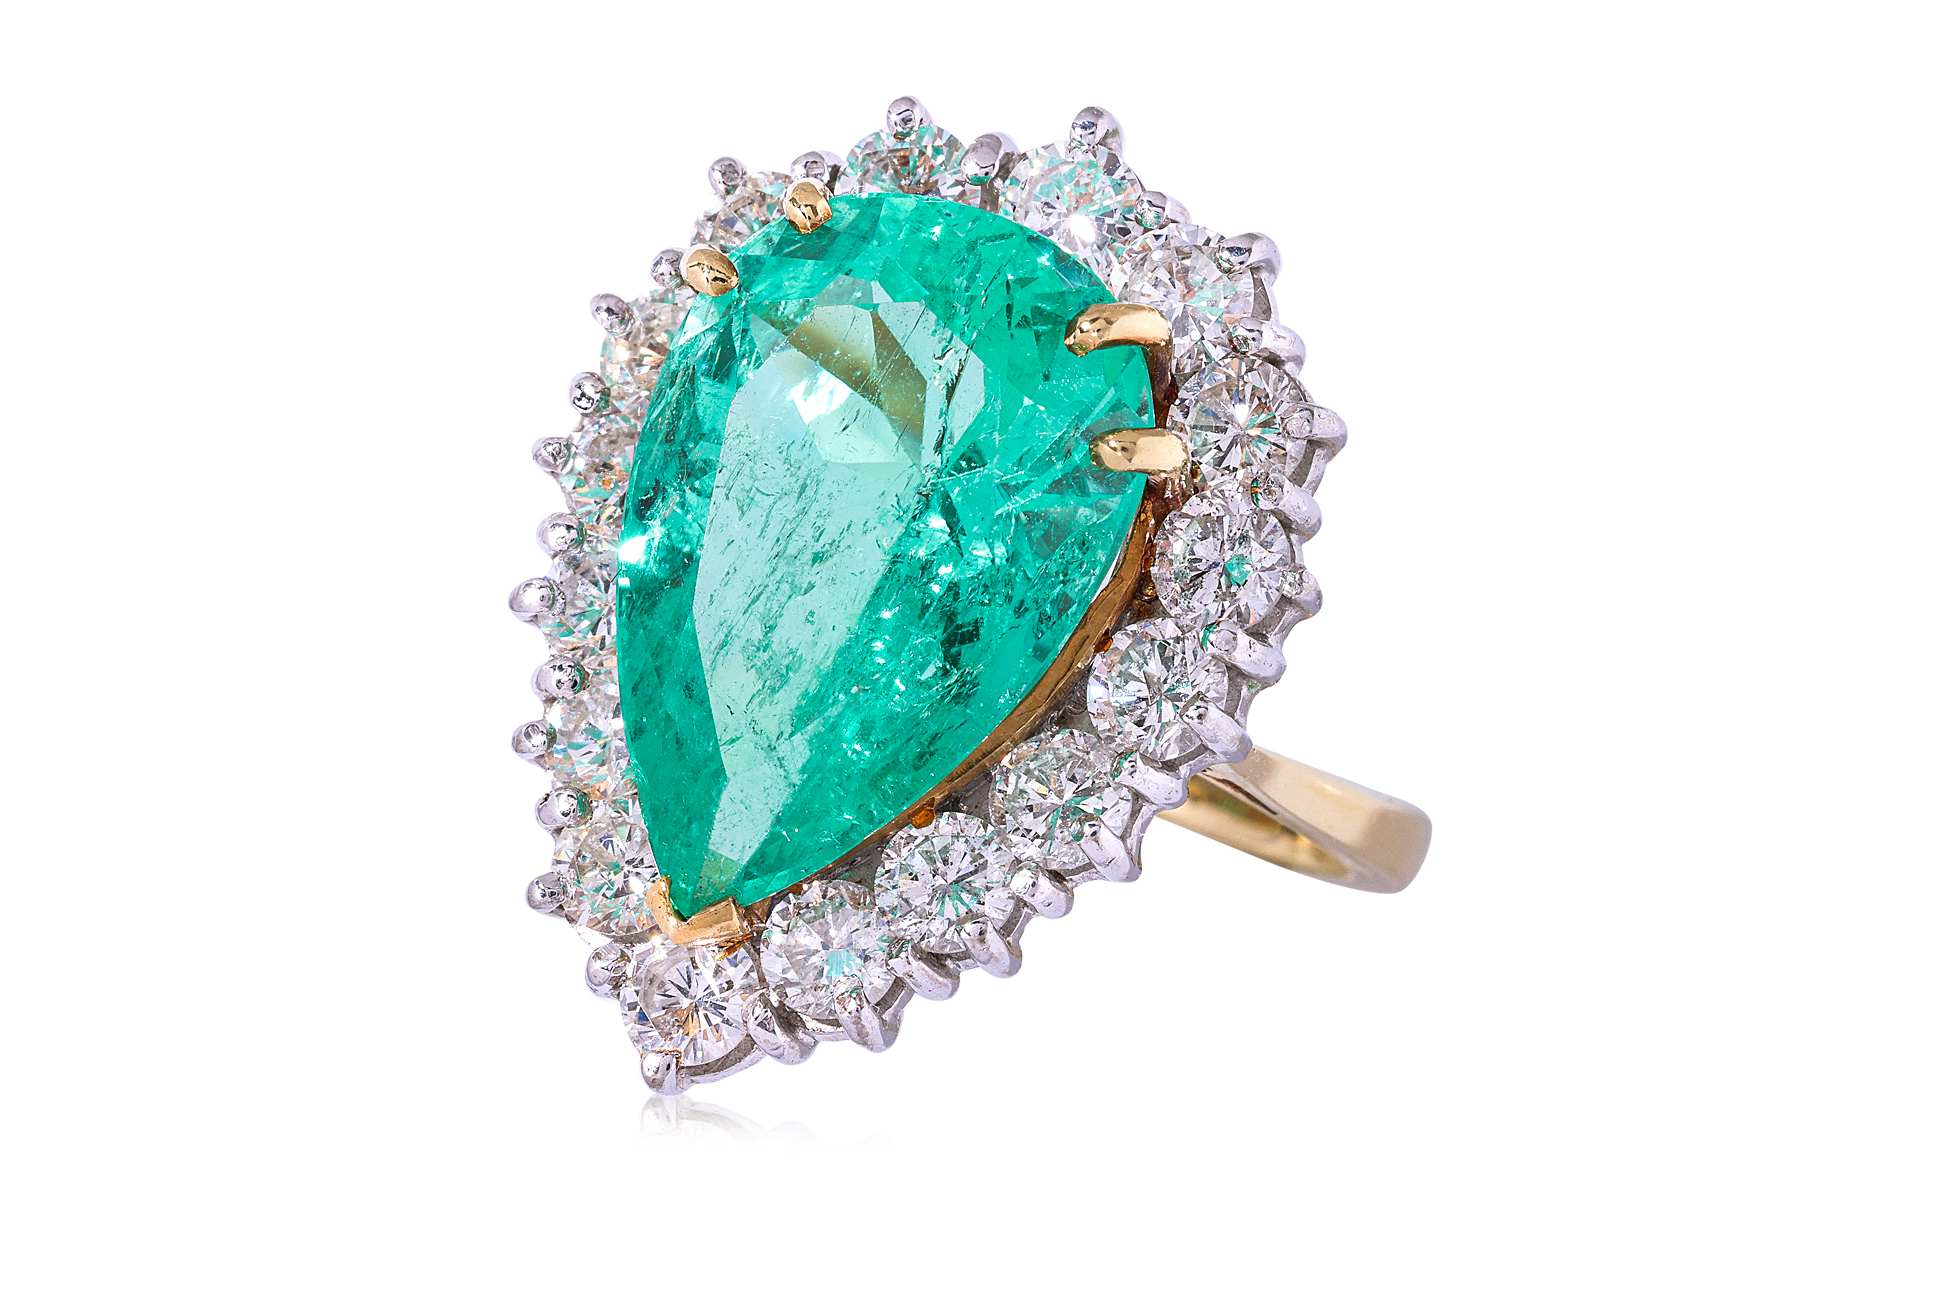 A COLOMBIAN EMERALD AND DIAMOND CLUSTER RING